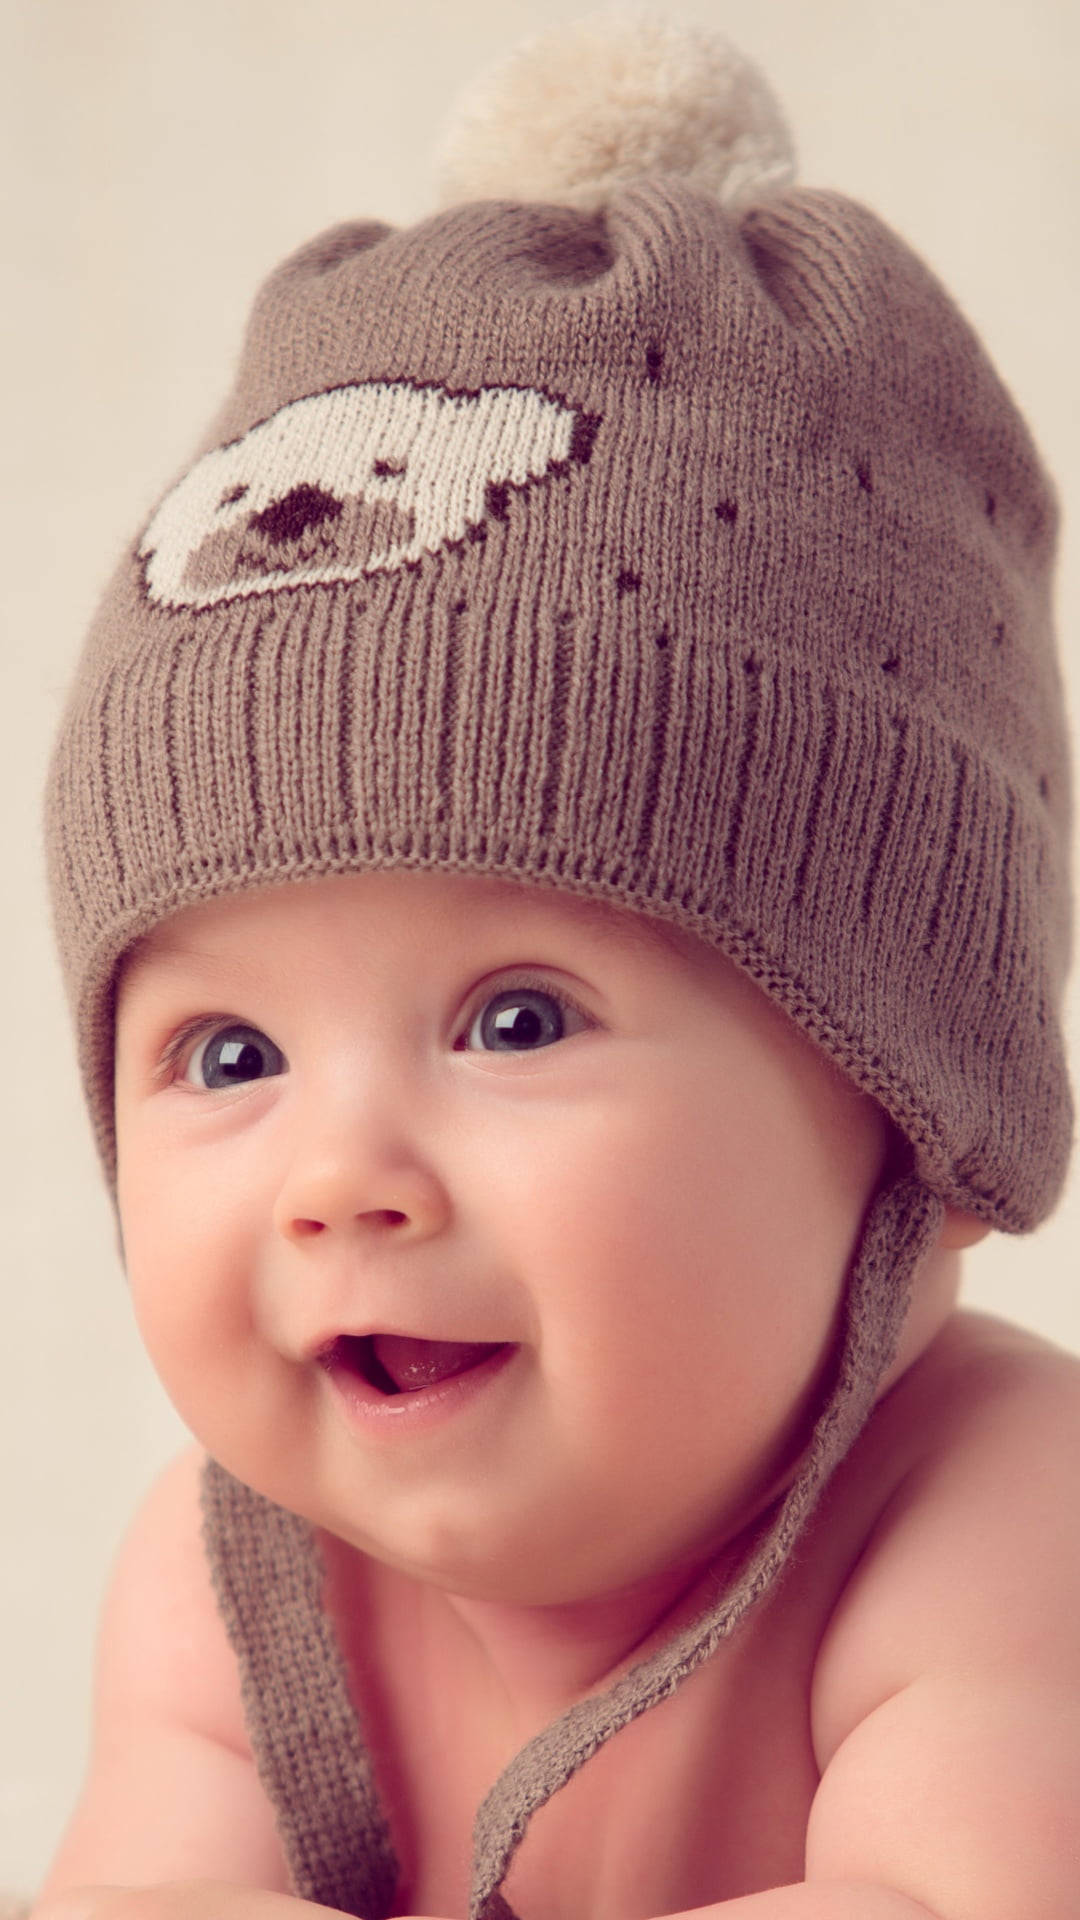 Cute Baby With A Bonnet Background